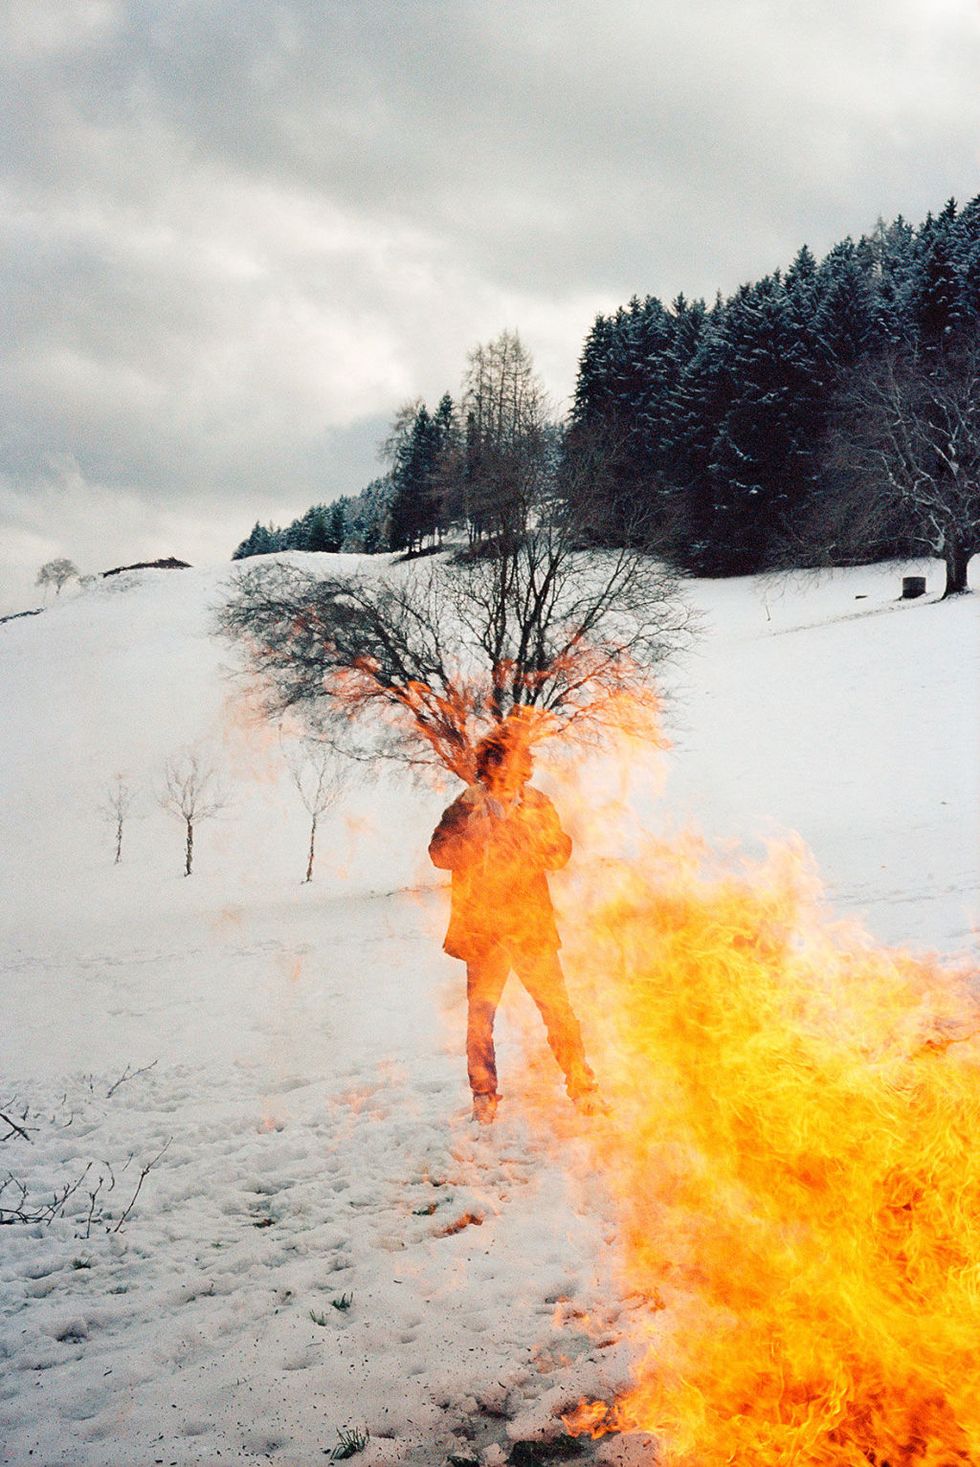 Human, Branch, Winter, Tree, People in nature, Geological phenomenon, Snow, Freezing, Fire, Heat, 